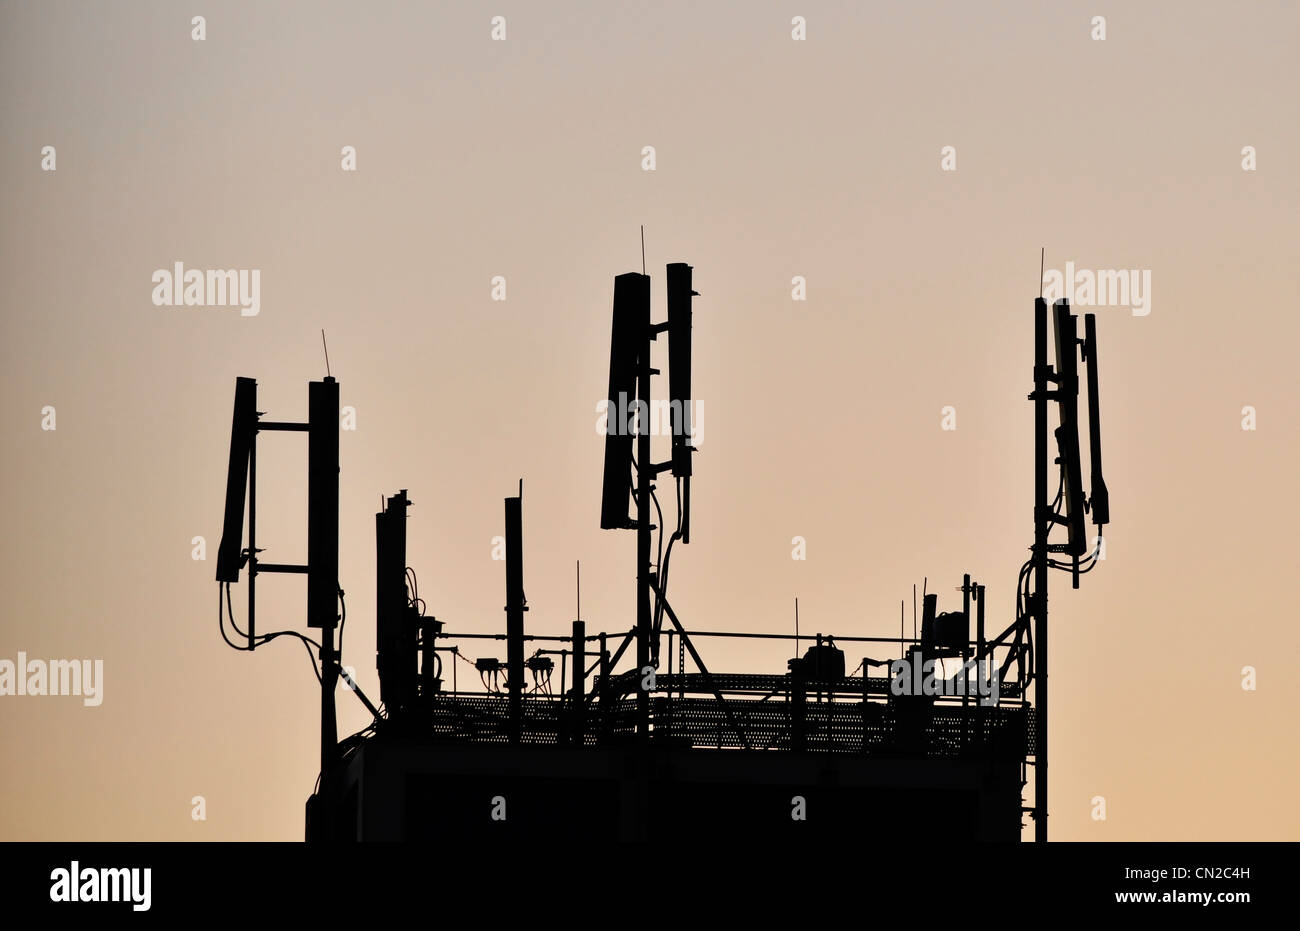 Antennas for cell phone network at sunset Stock Photo